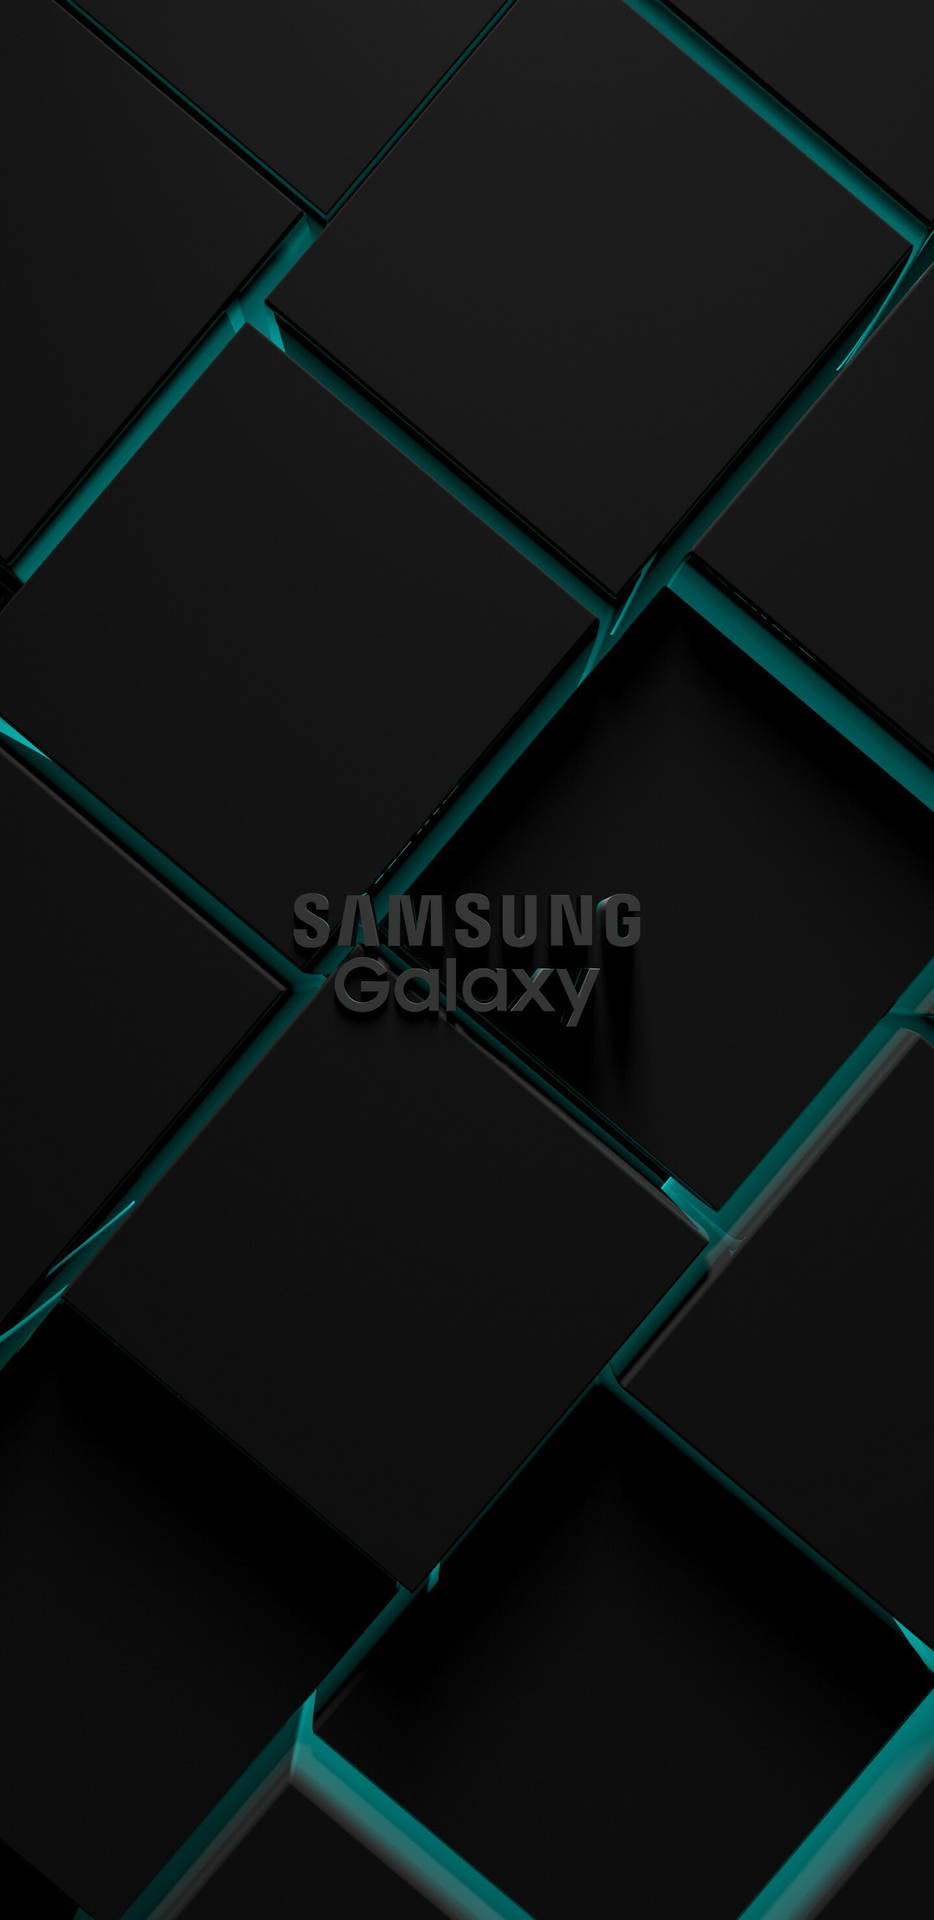 Samsung Galaxy 4k Logo Black Cubic Shapes Picture